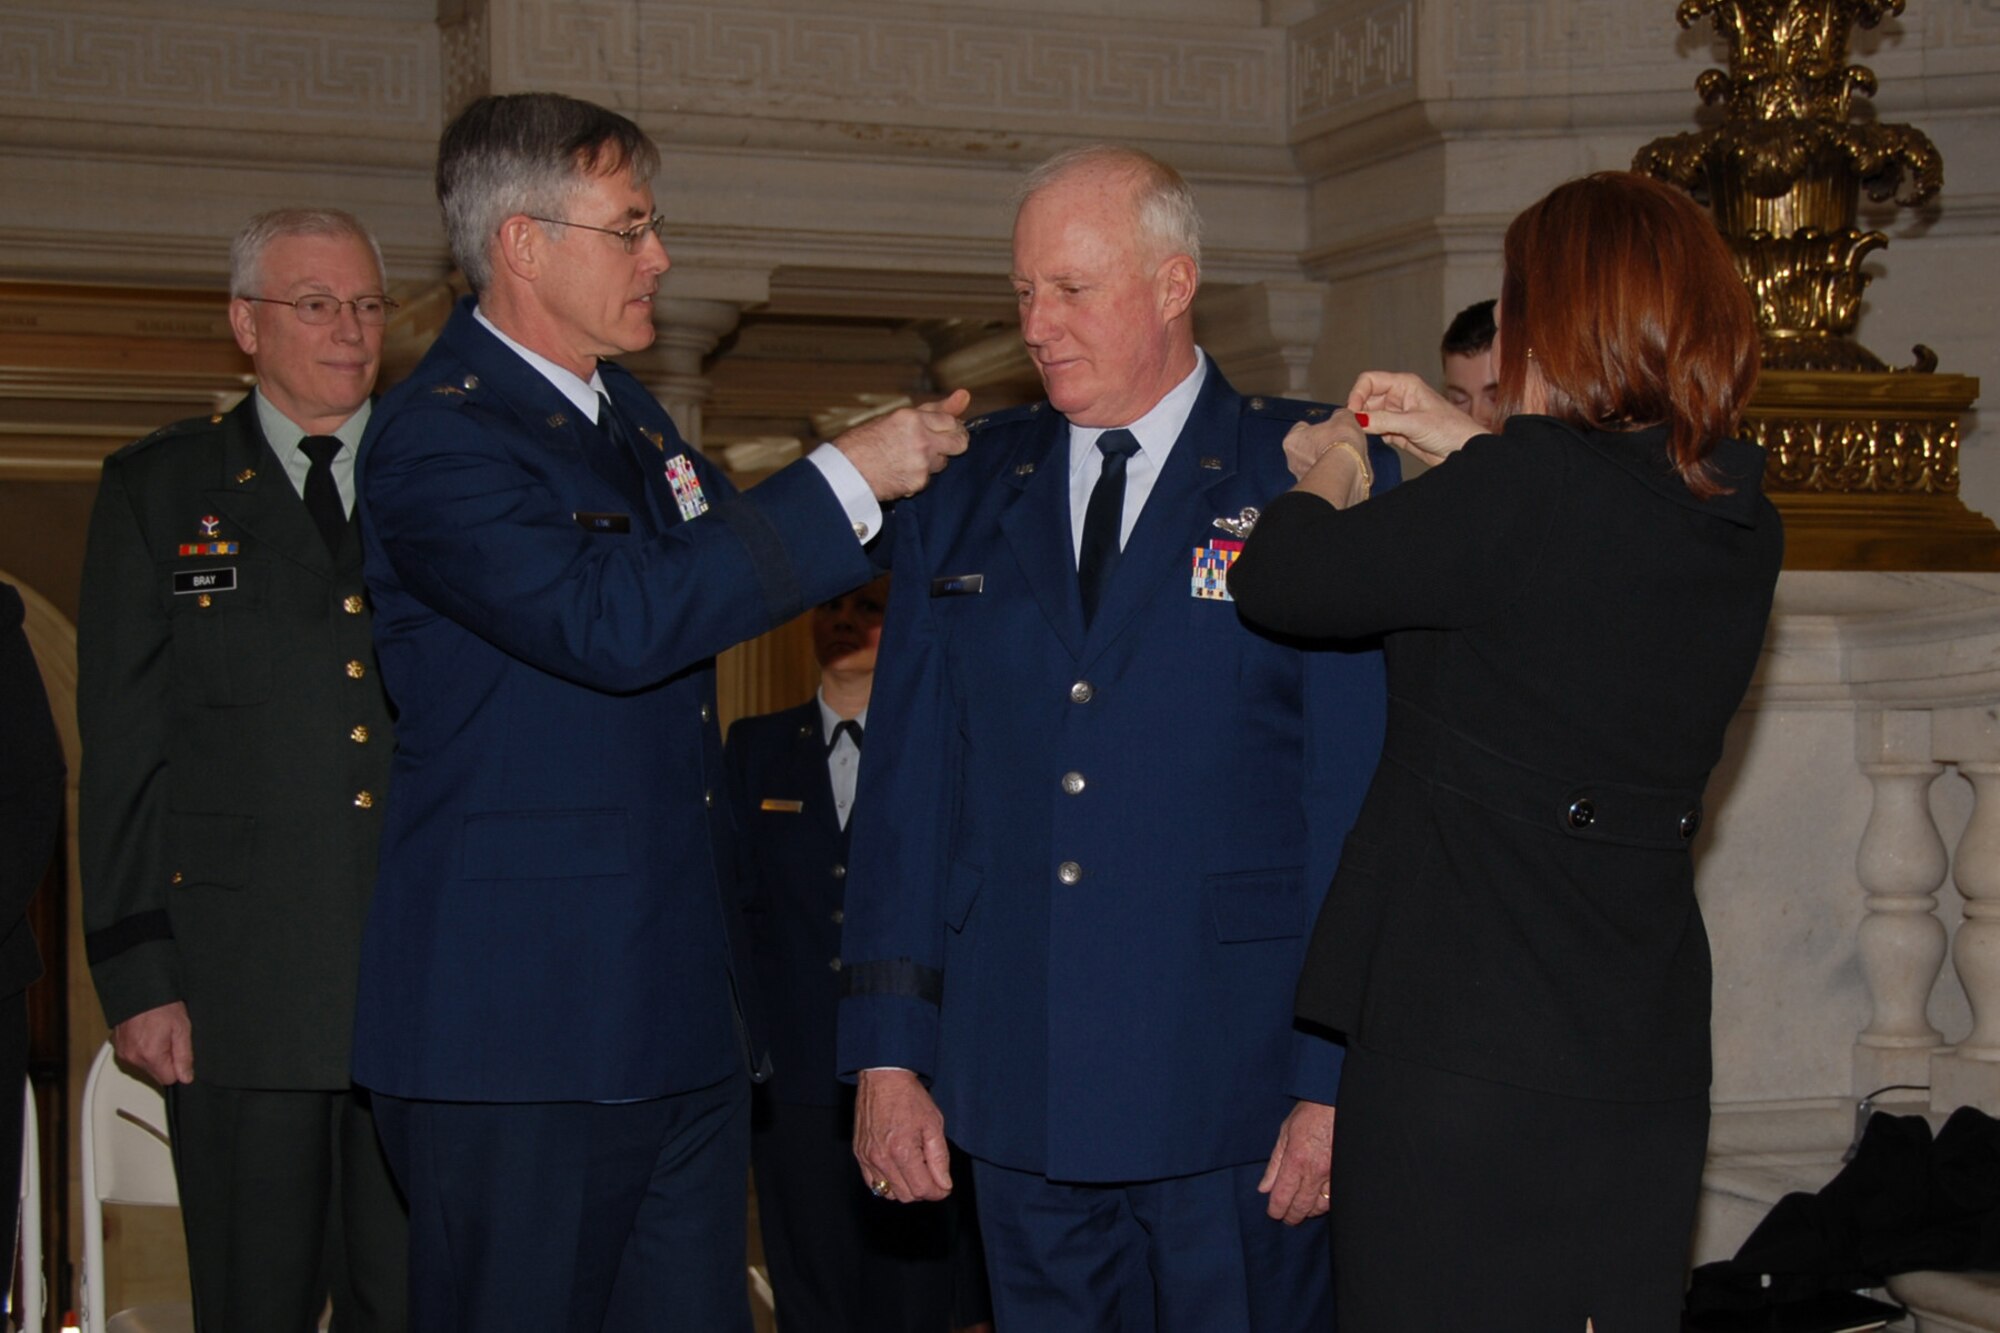 Major General (MG) Thomas J. Haynes, Air National Guard (ANG) assistant to the commander, Air Mobility Command (AMC), and former Assistant Adjutant General for Air, Rhode Island Air National Guard (RIANG), was promoted to Major General in the Rhode Island State House Rotunda, Providence, RI. MG Haynes was pinned by his wife, Barbara and MG (ret) Thomas Kane, former director of plans and programs for AMC. USAF Photo taken by Technical Sergeant Jason Long (Released)